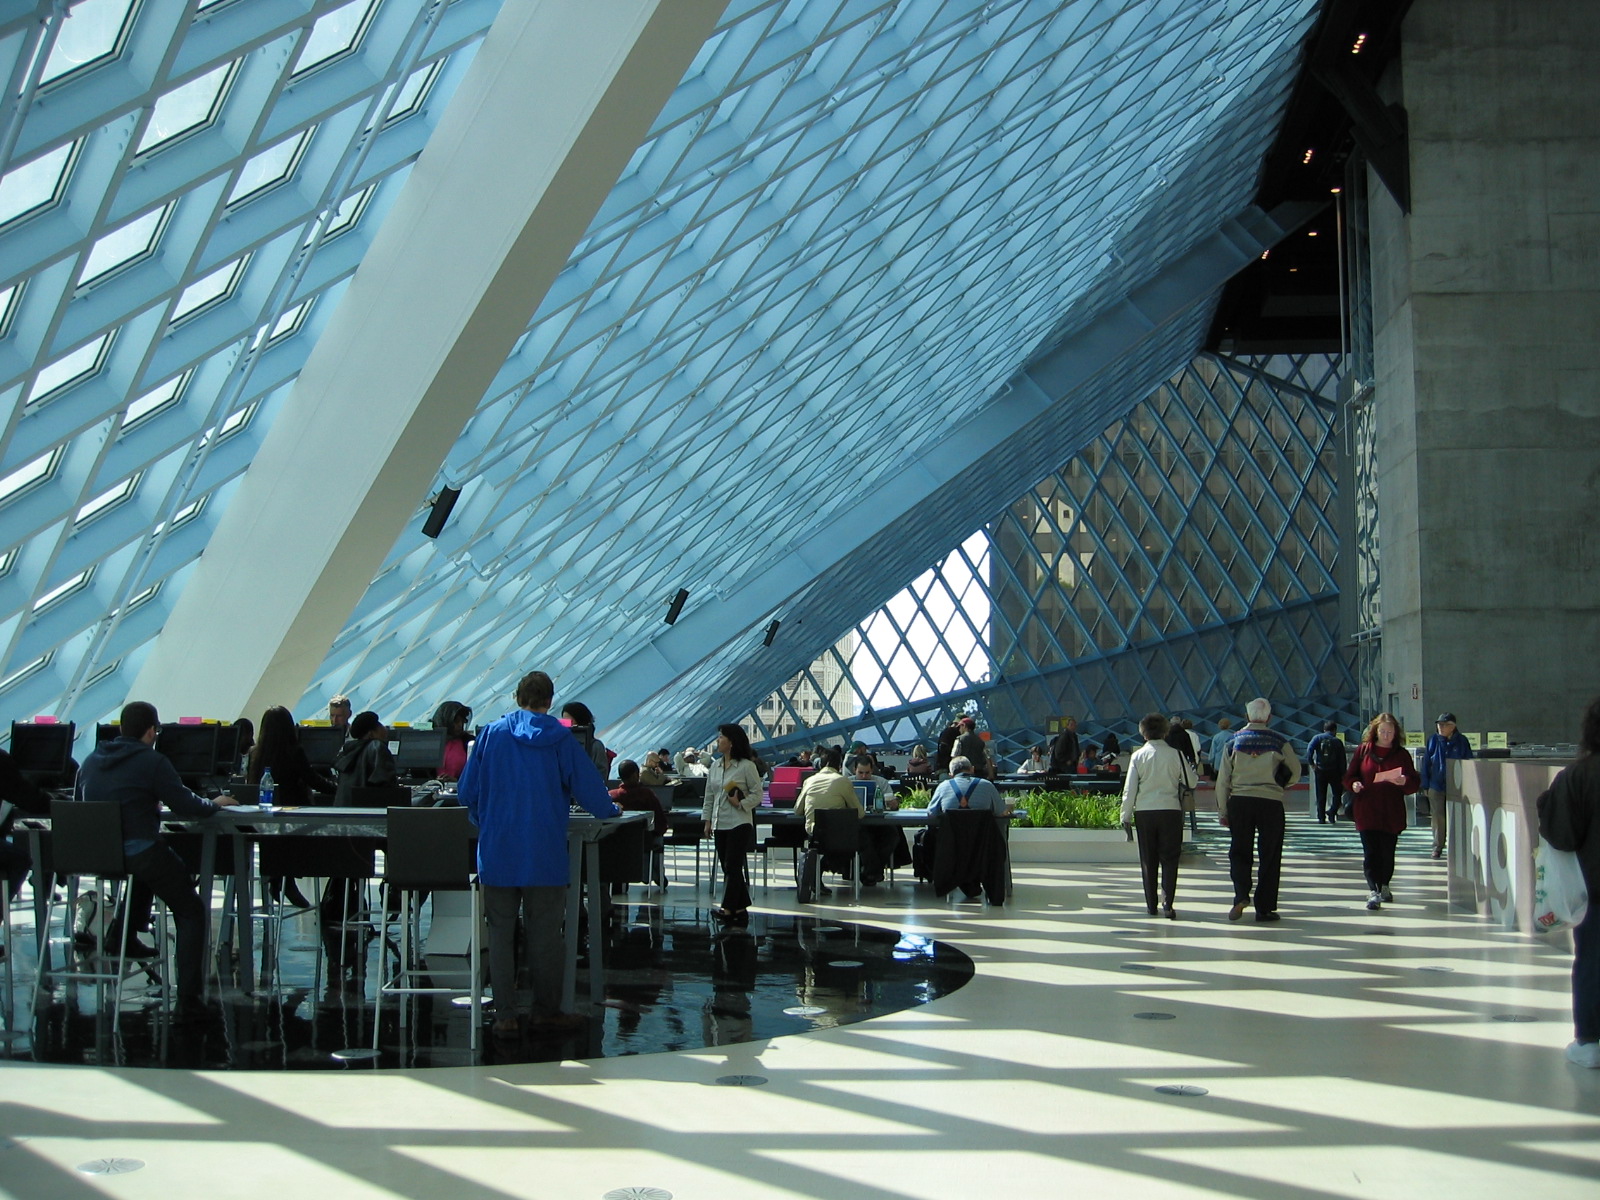 interior of seattle public library